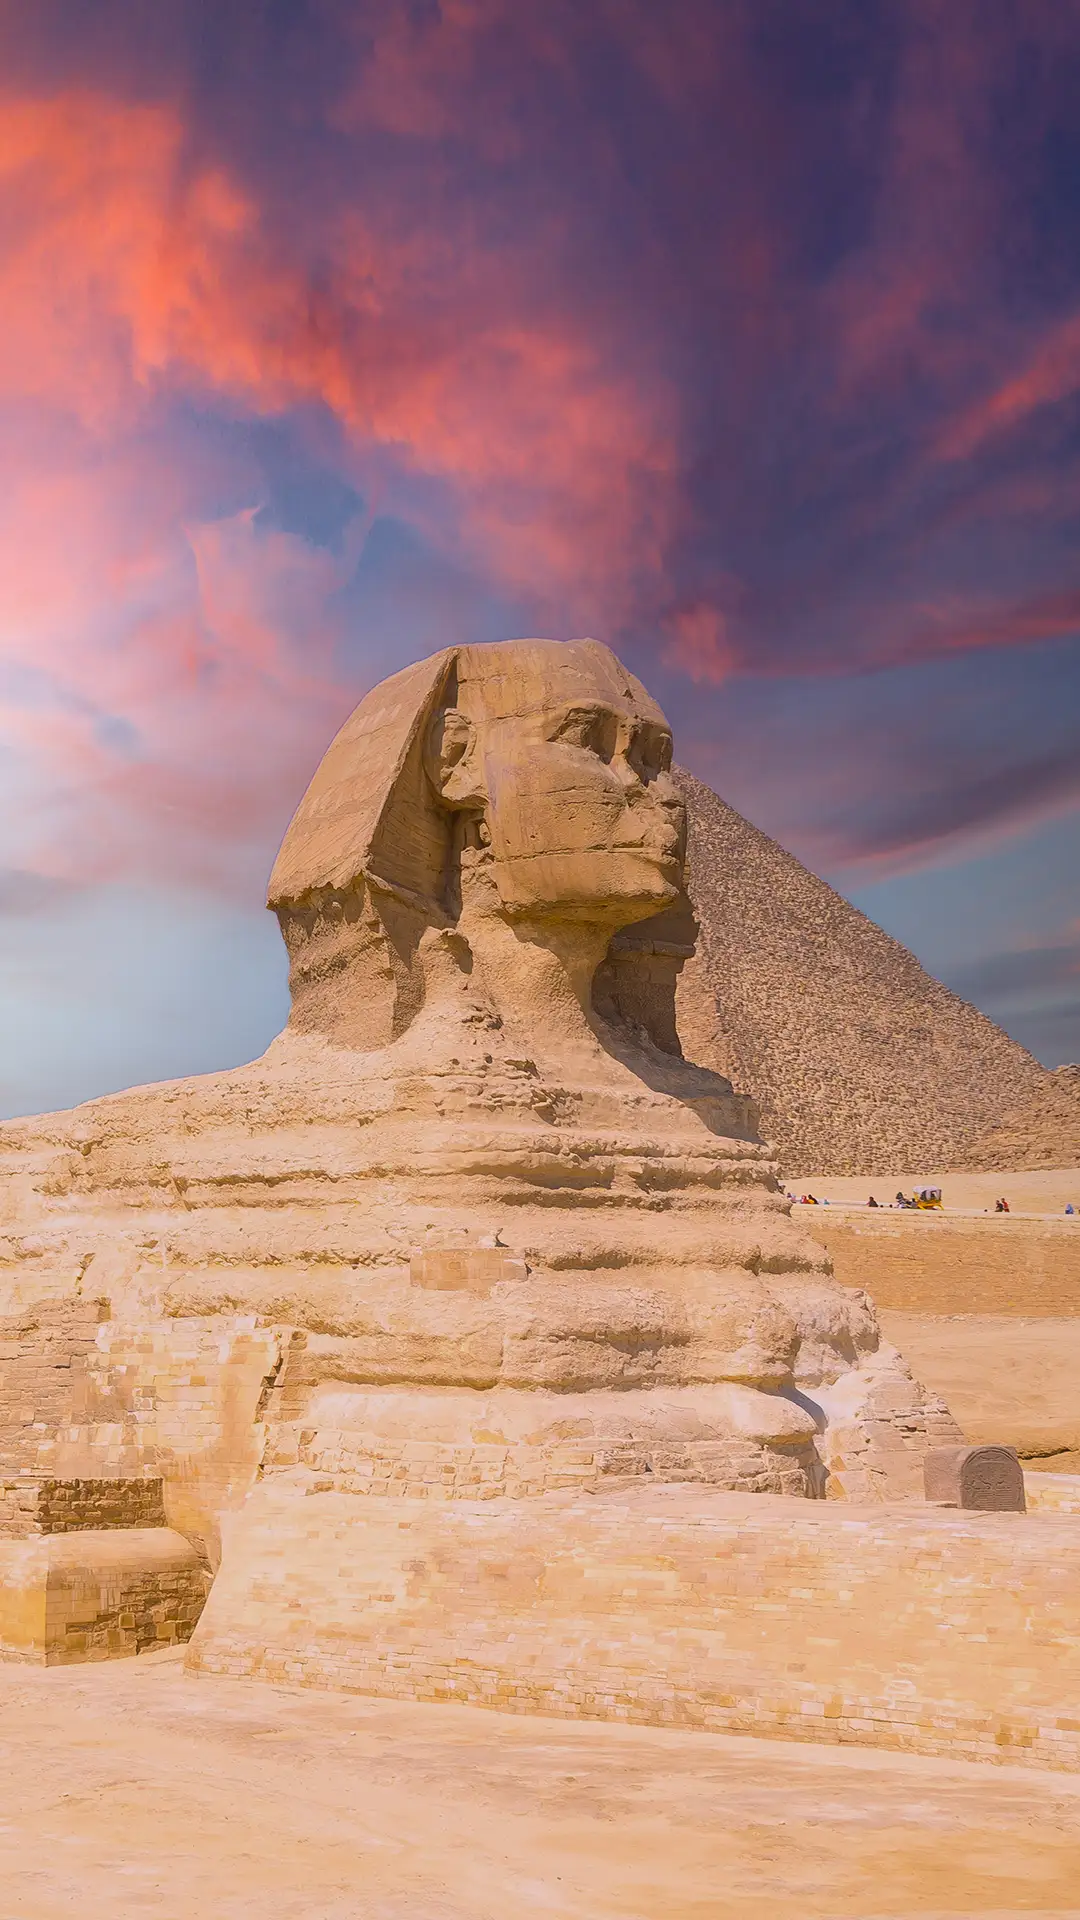 The Great Sphinx of Giza and in the background the Pyramids of Giza at sunset, the oldest funerary monument in the world.